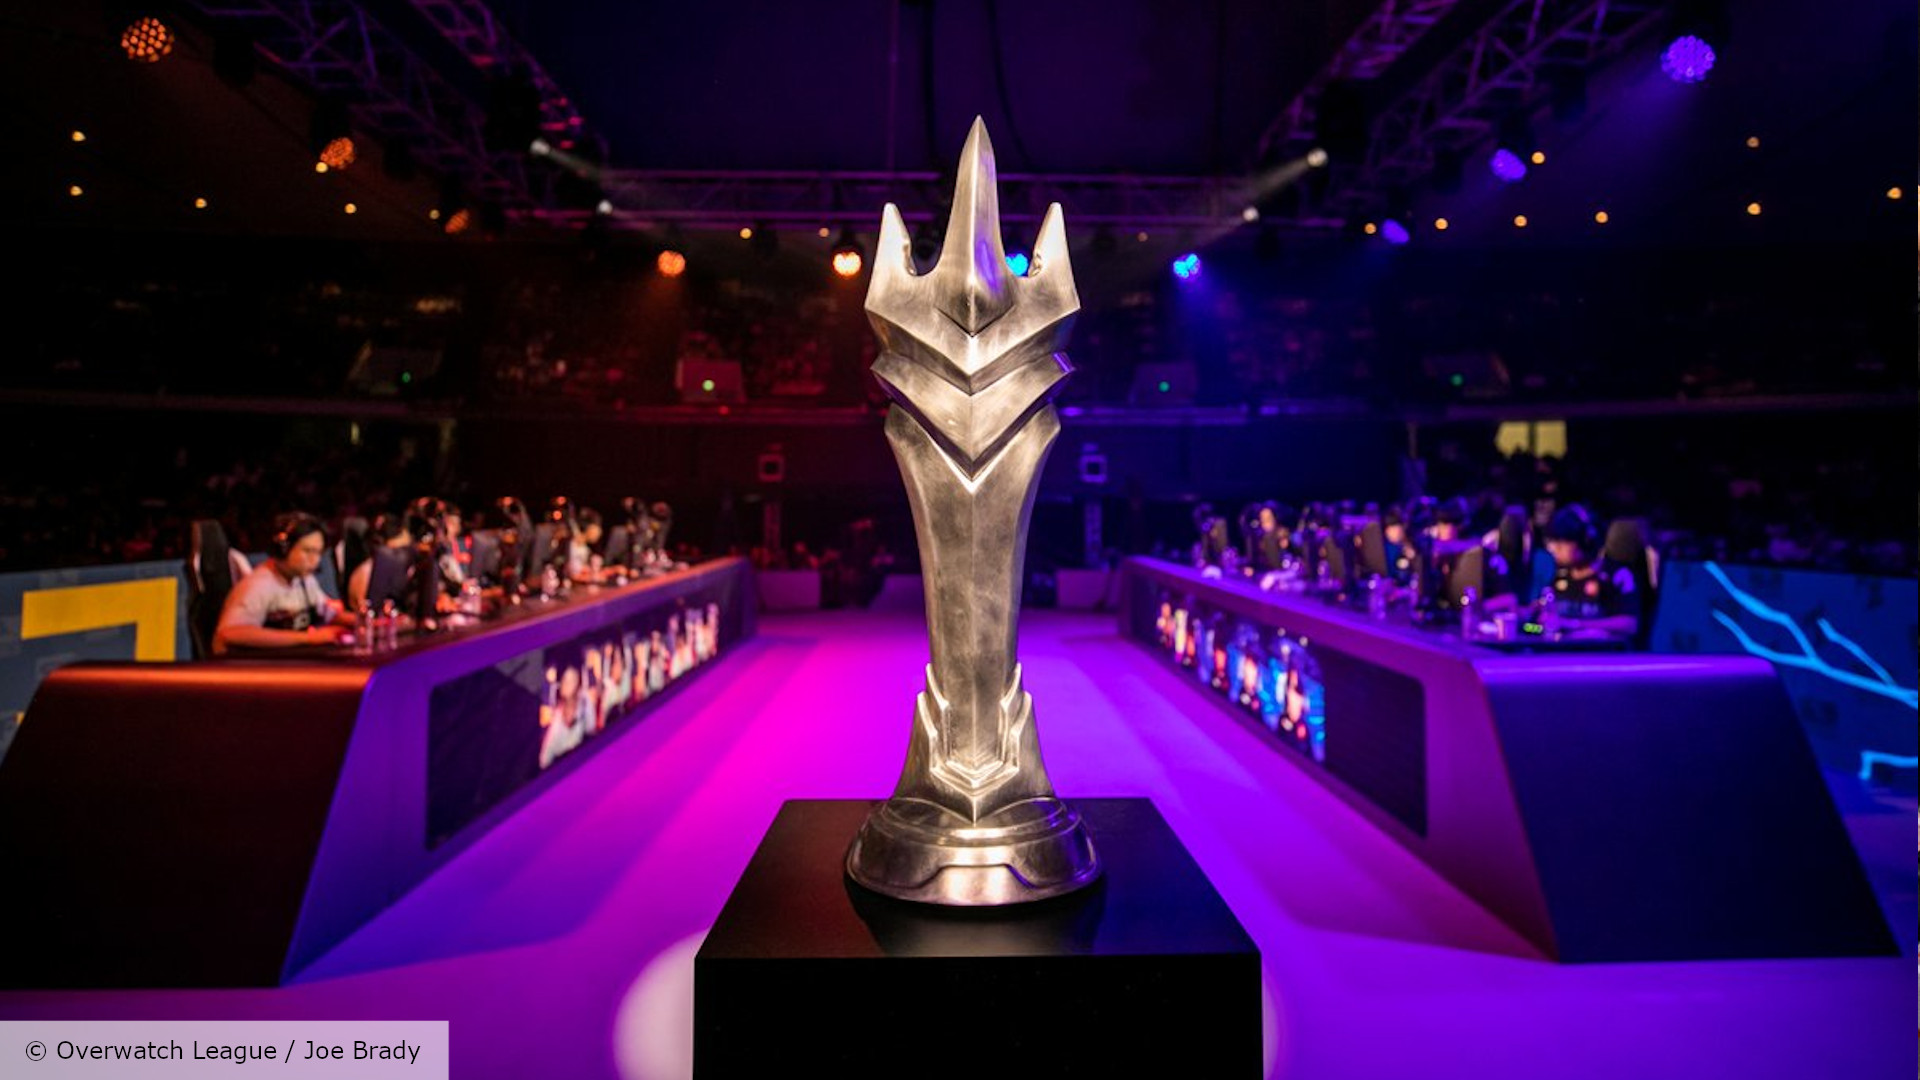 The Overwatch League grand final was the esports’ most important yet